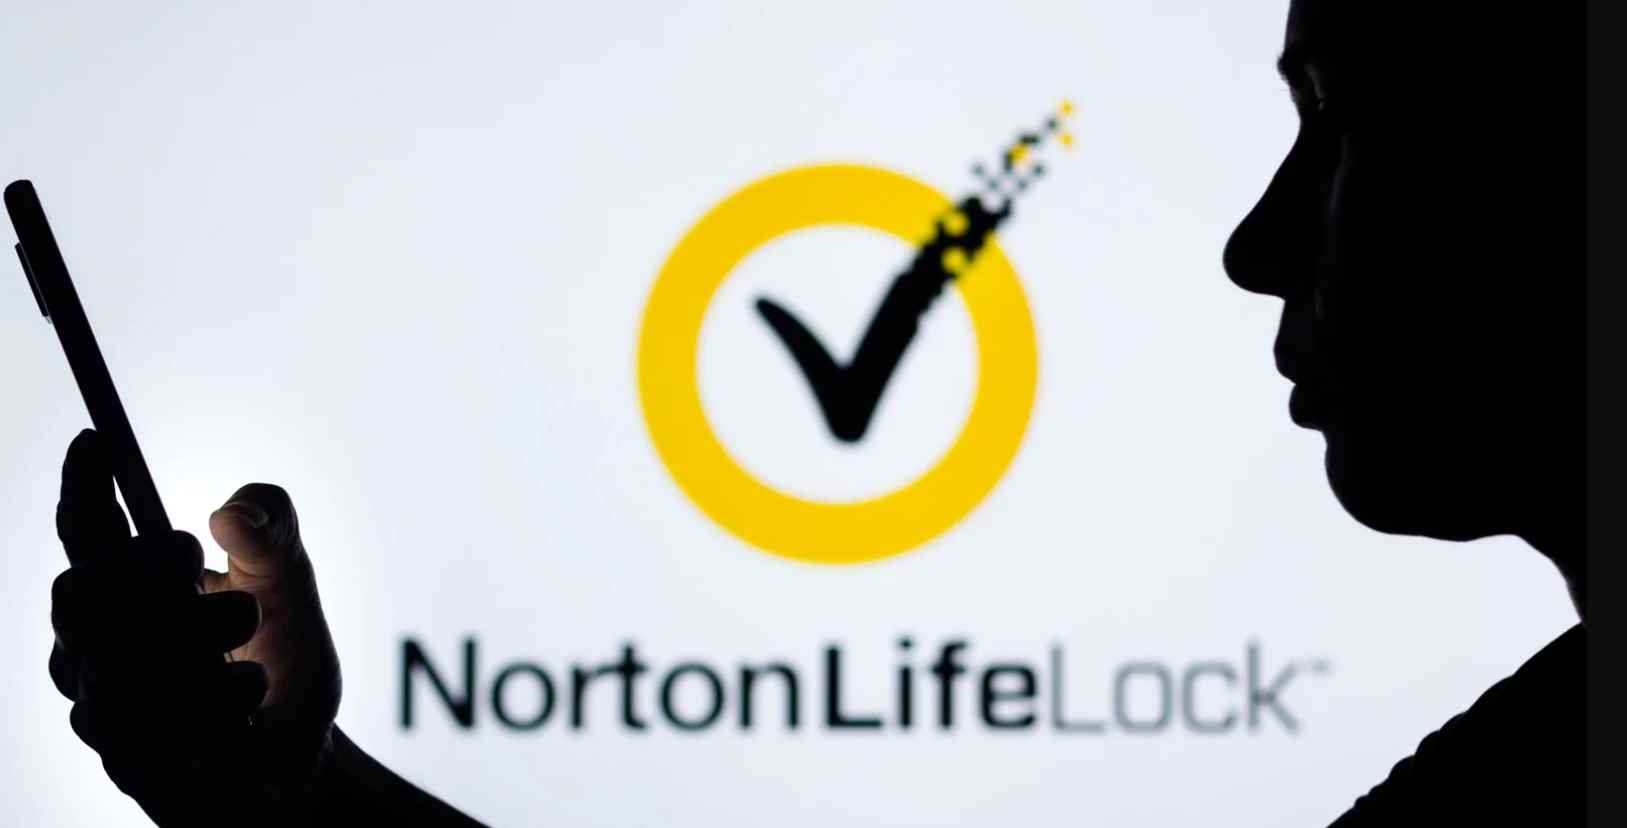 Cyber security company Norton Lifelock, becomes victim of ransomware, who will protect the customers?